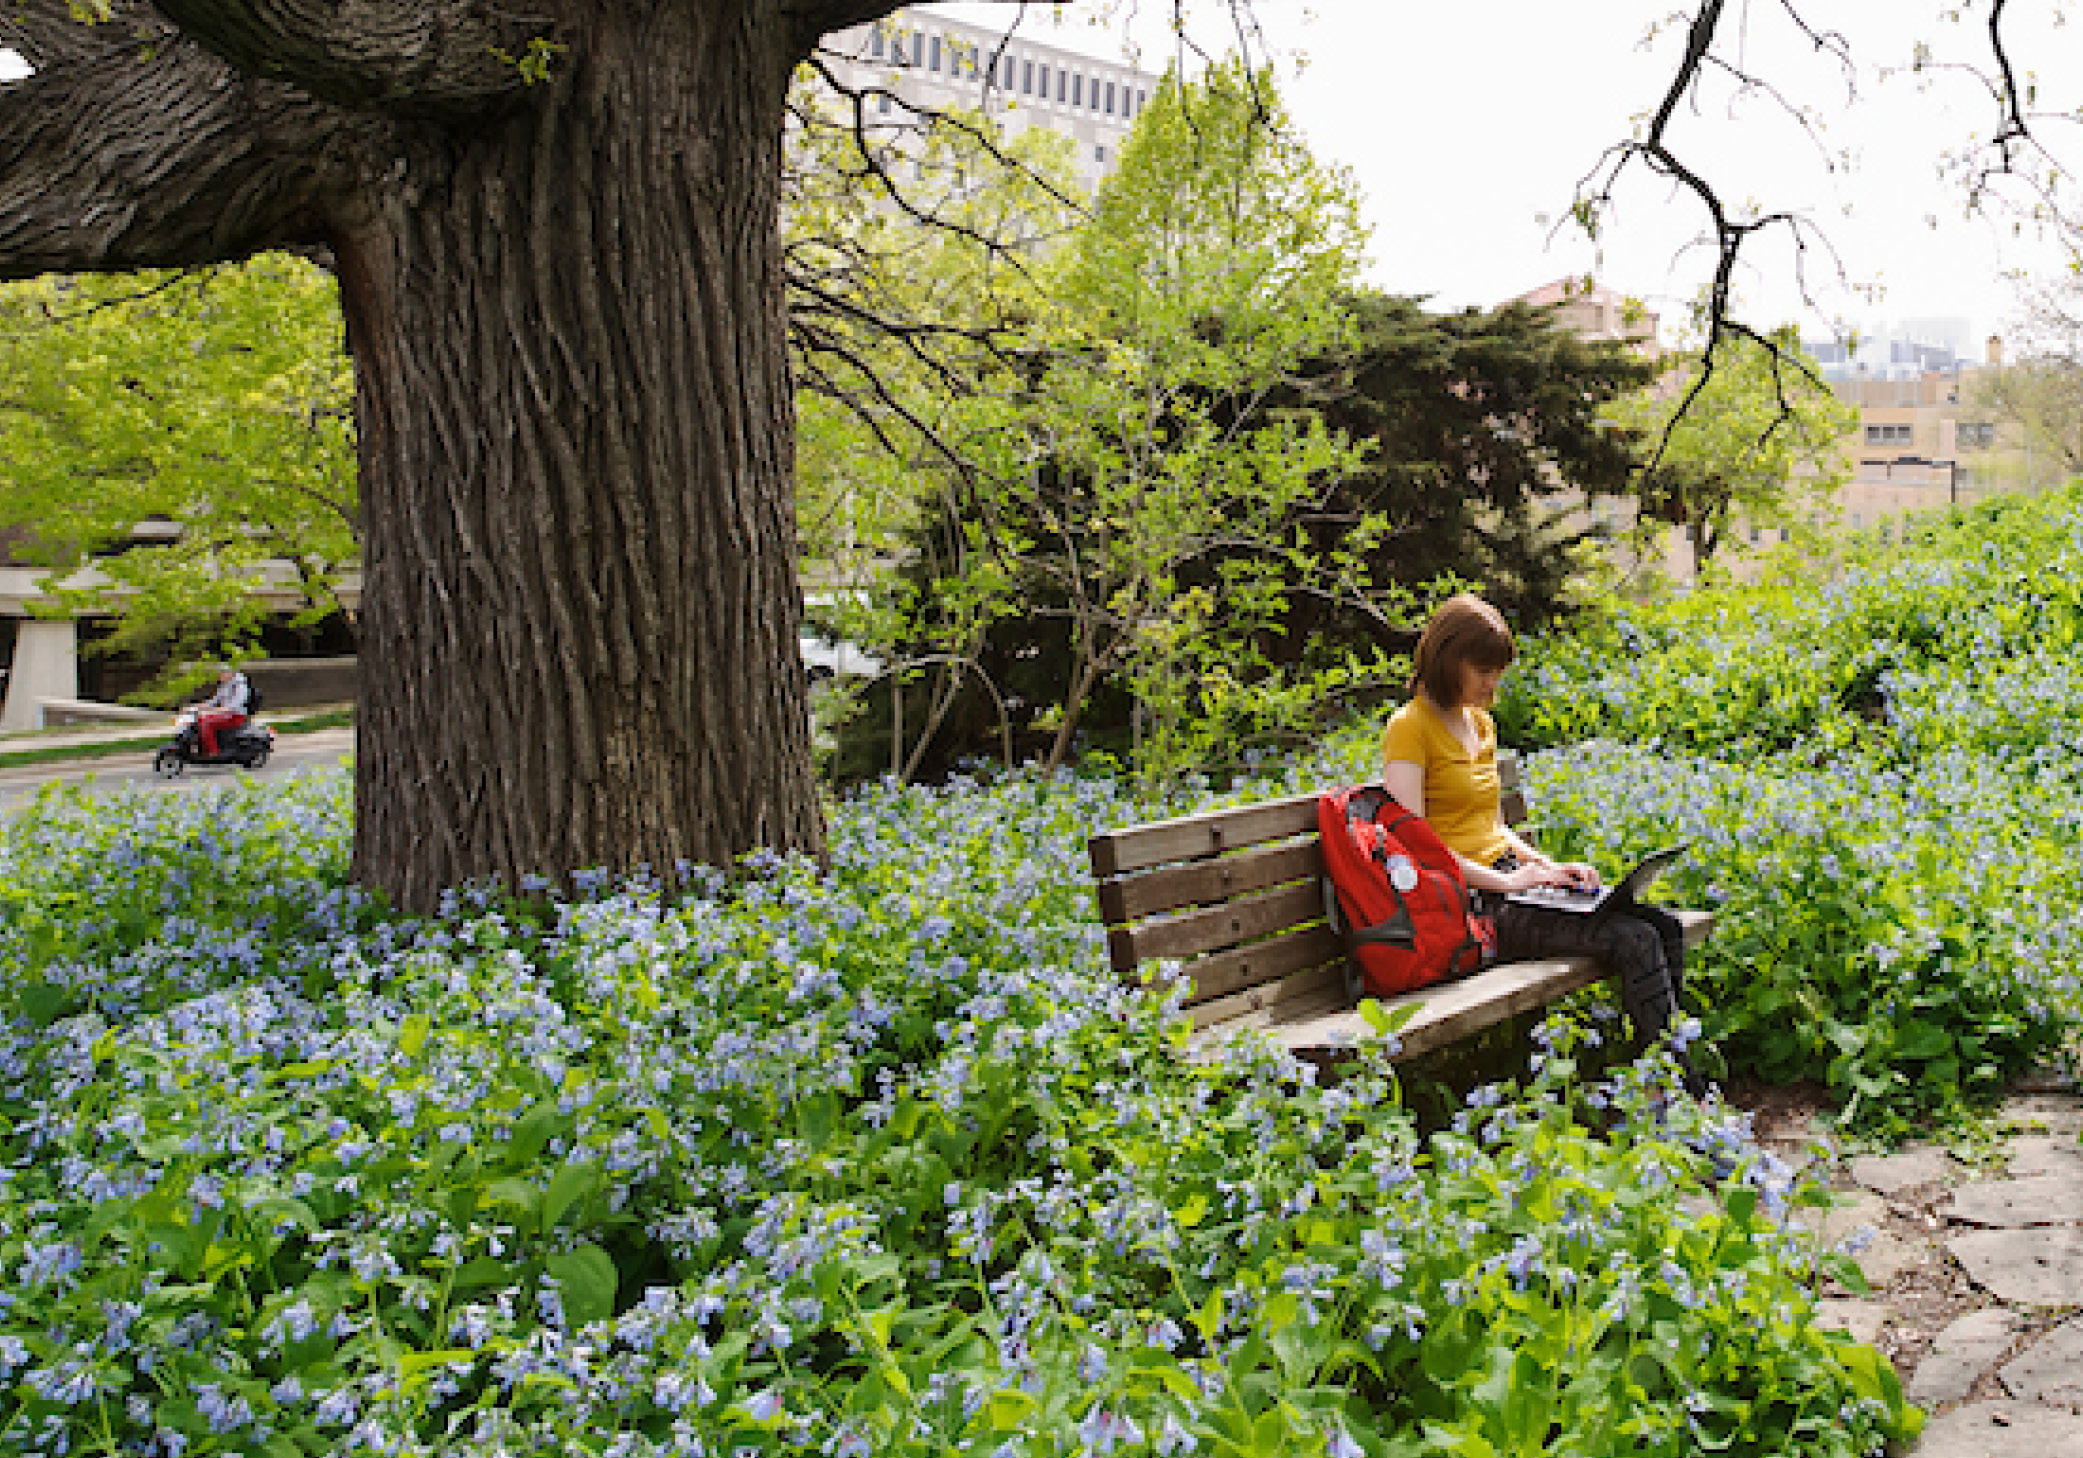 A student sits on a bench in front of a large tree and surrounded by medium height flowers. The student holds a laptop on their lap and has a backpack on the seat next to them.